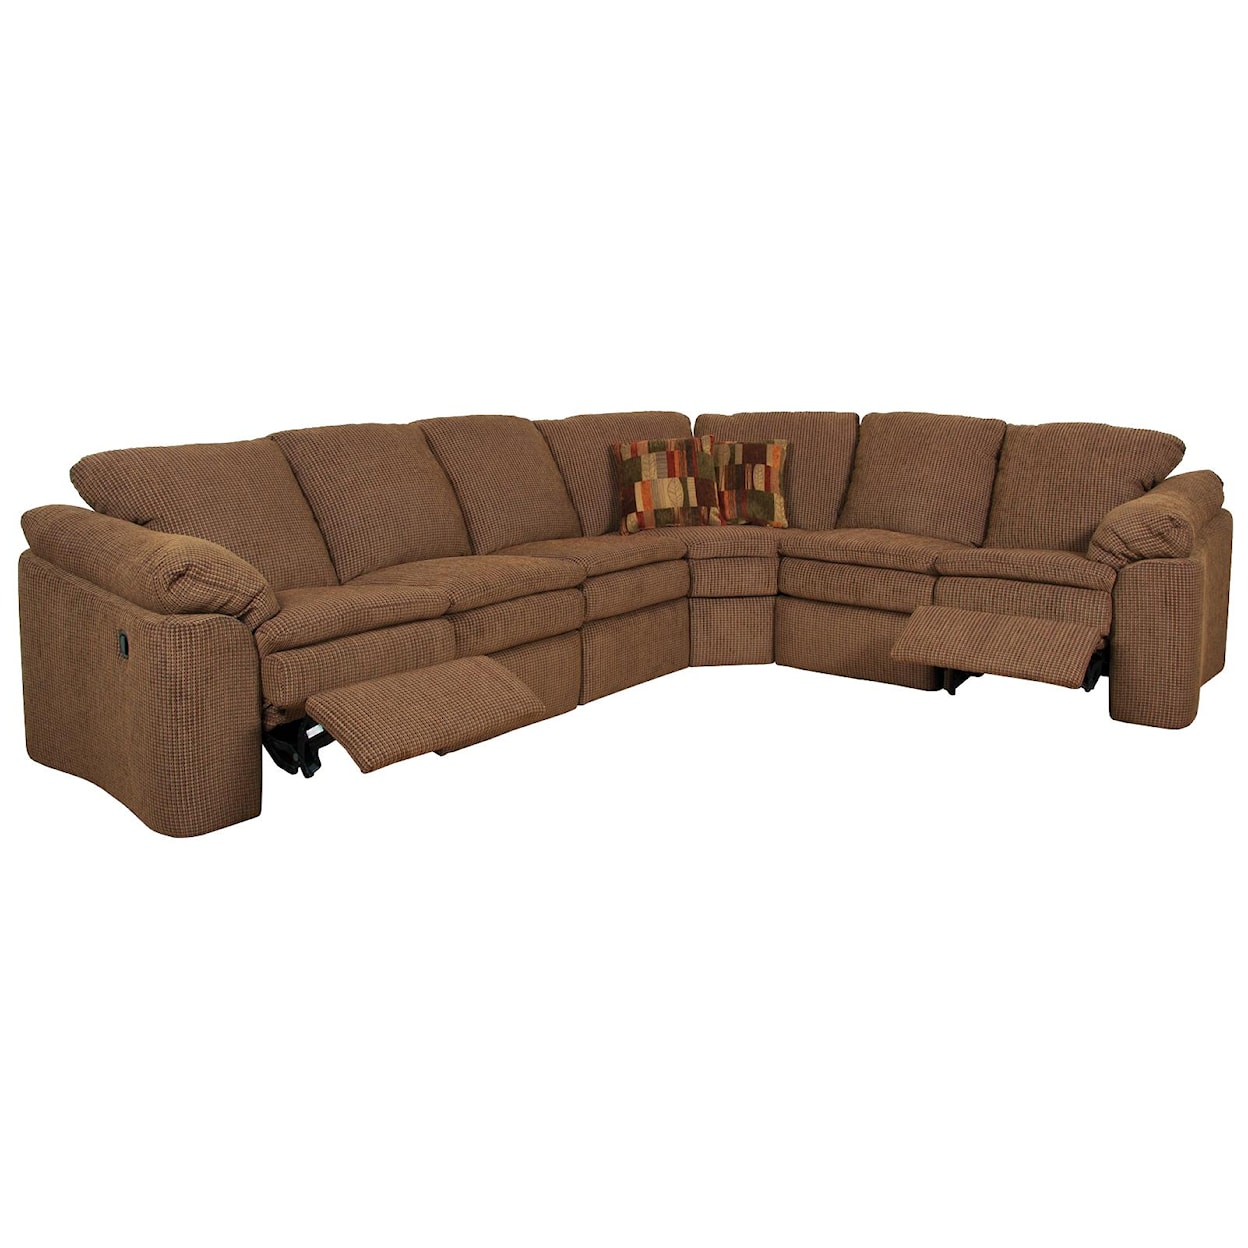 Tennessee Custom Upholstery 7300/L Series Six Person Reclining Sectional Sofa